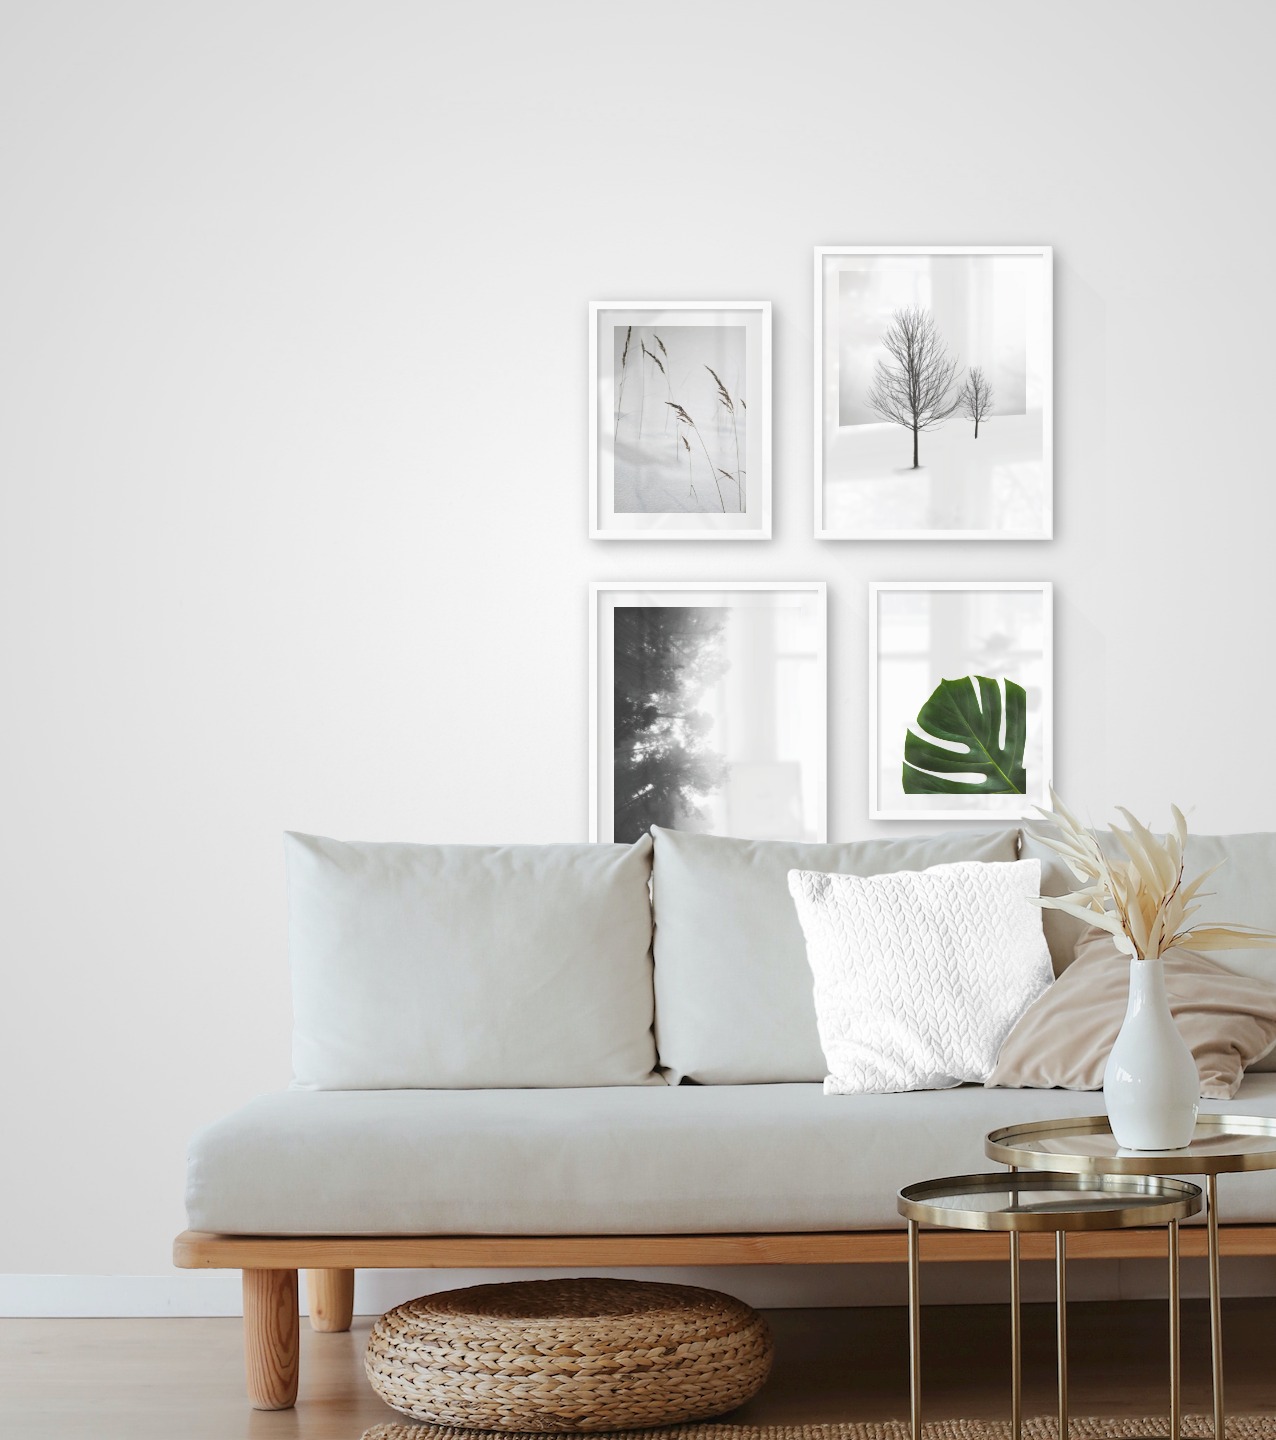 Gallery wall with picture frames in white in sizes 30x40 and 40x50 with prints "Sharp in the snow", "Trees in the snow", "Foggy wooden tops from the side" and "Plant"